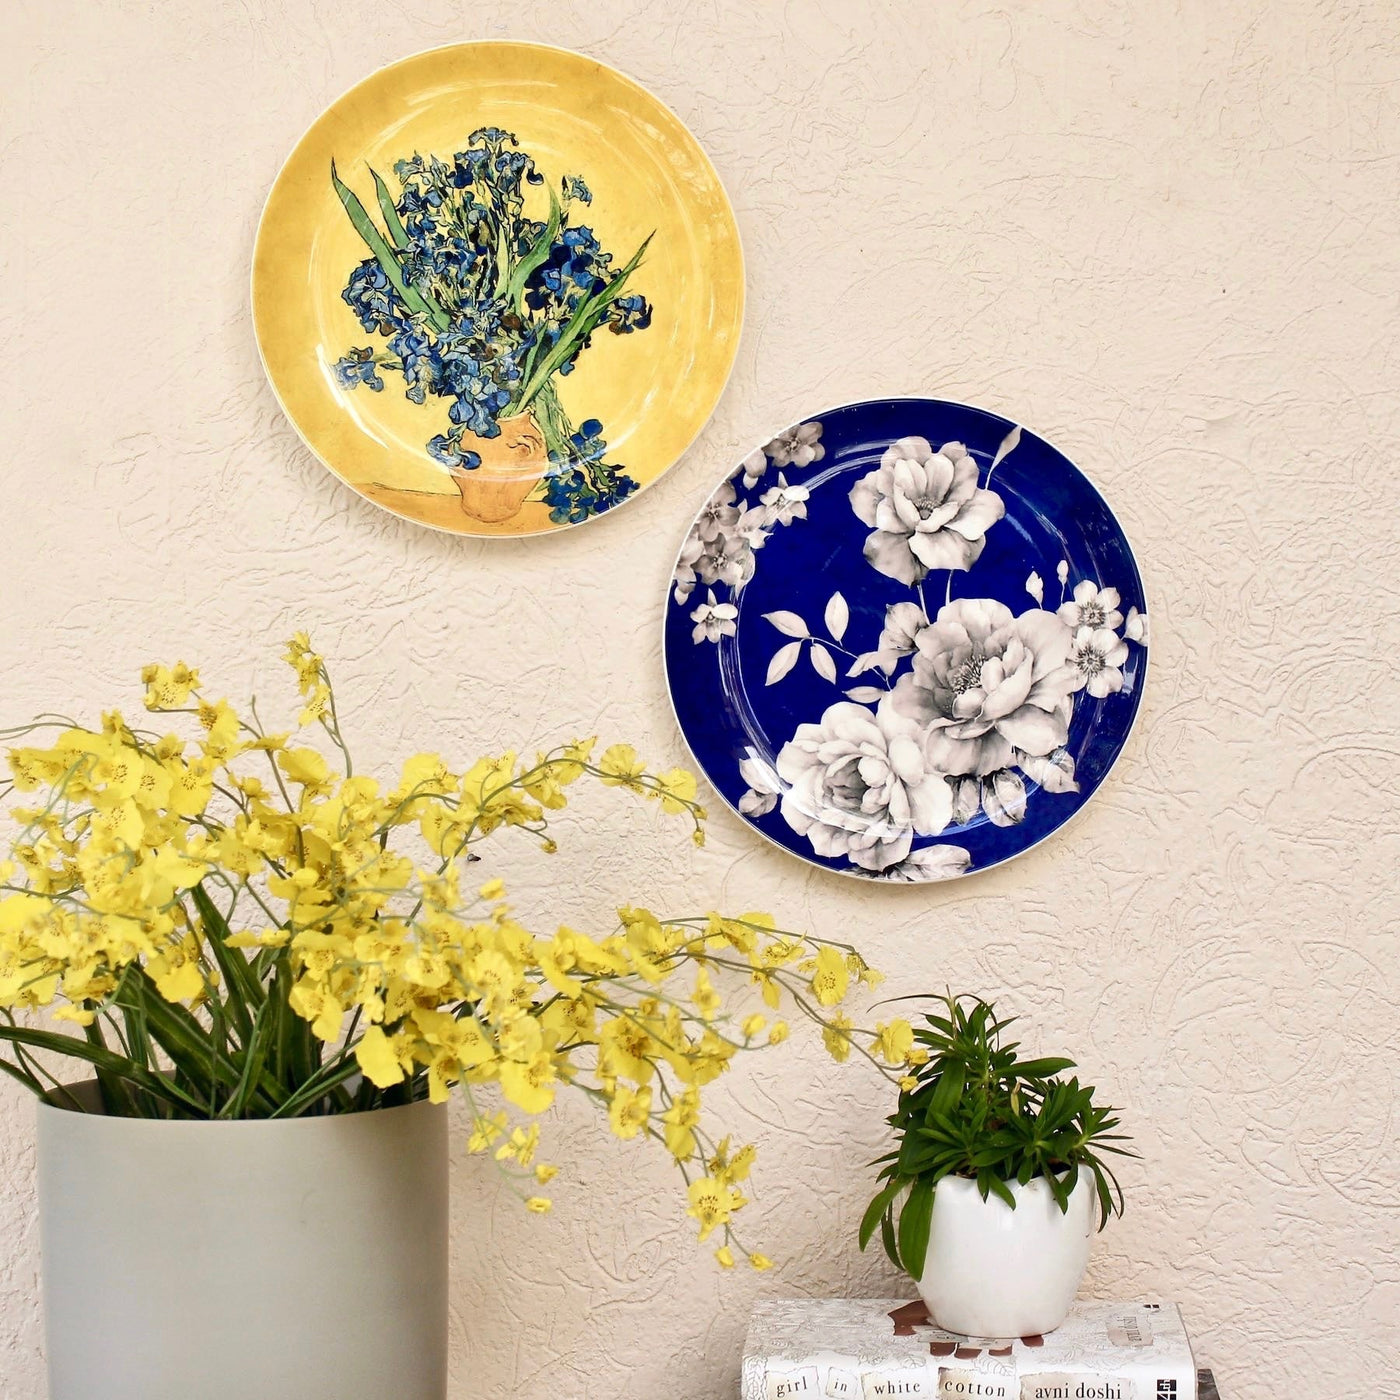 blue and white decorative wall plate